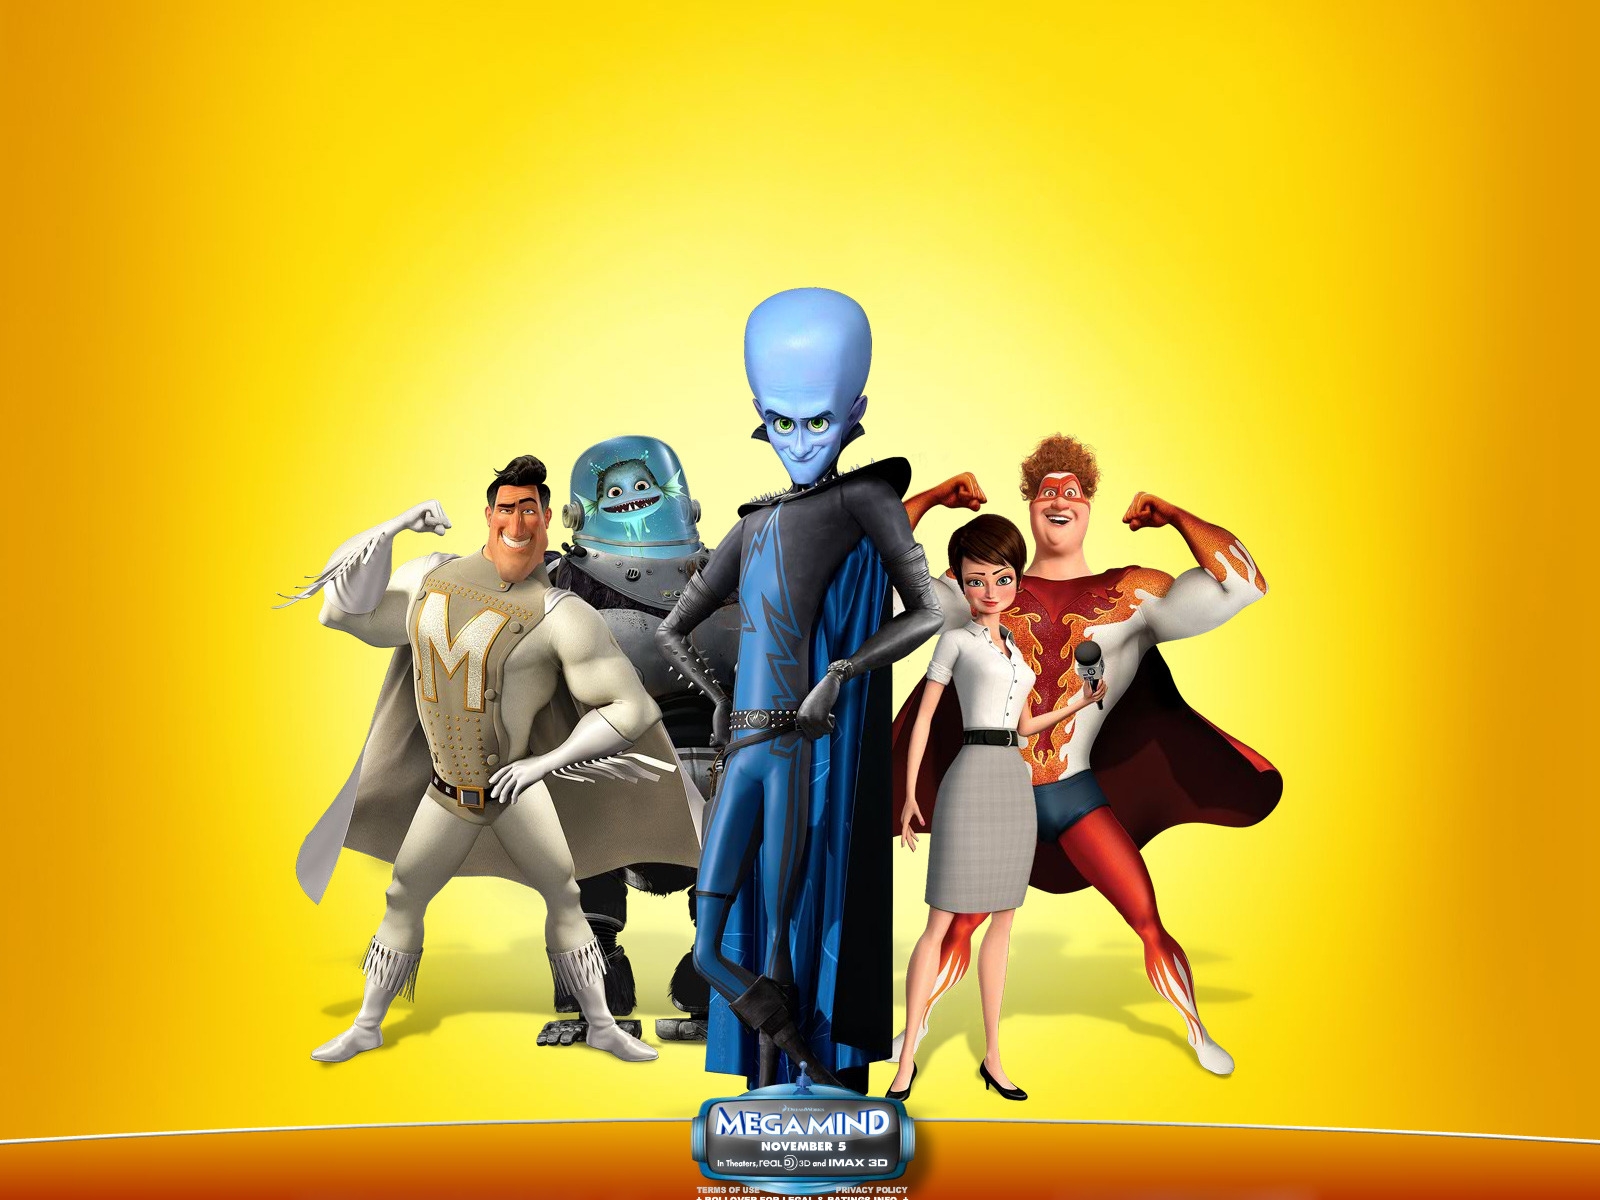 Megamind Movie for 1600 x 1200 resolution